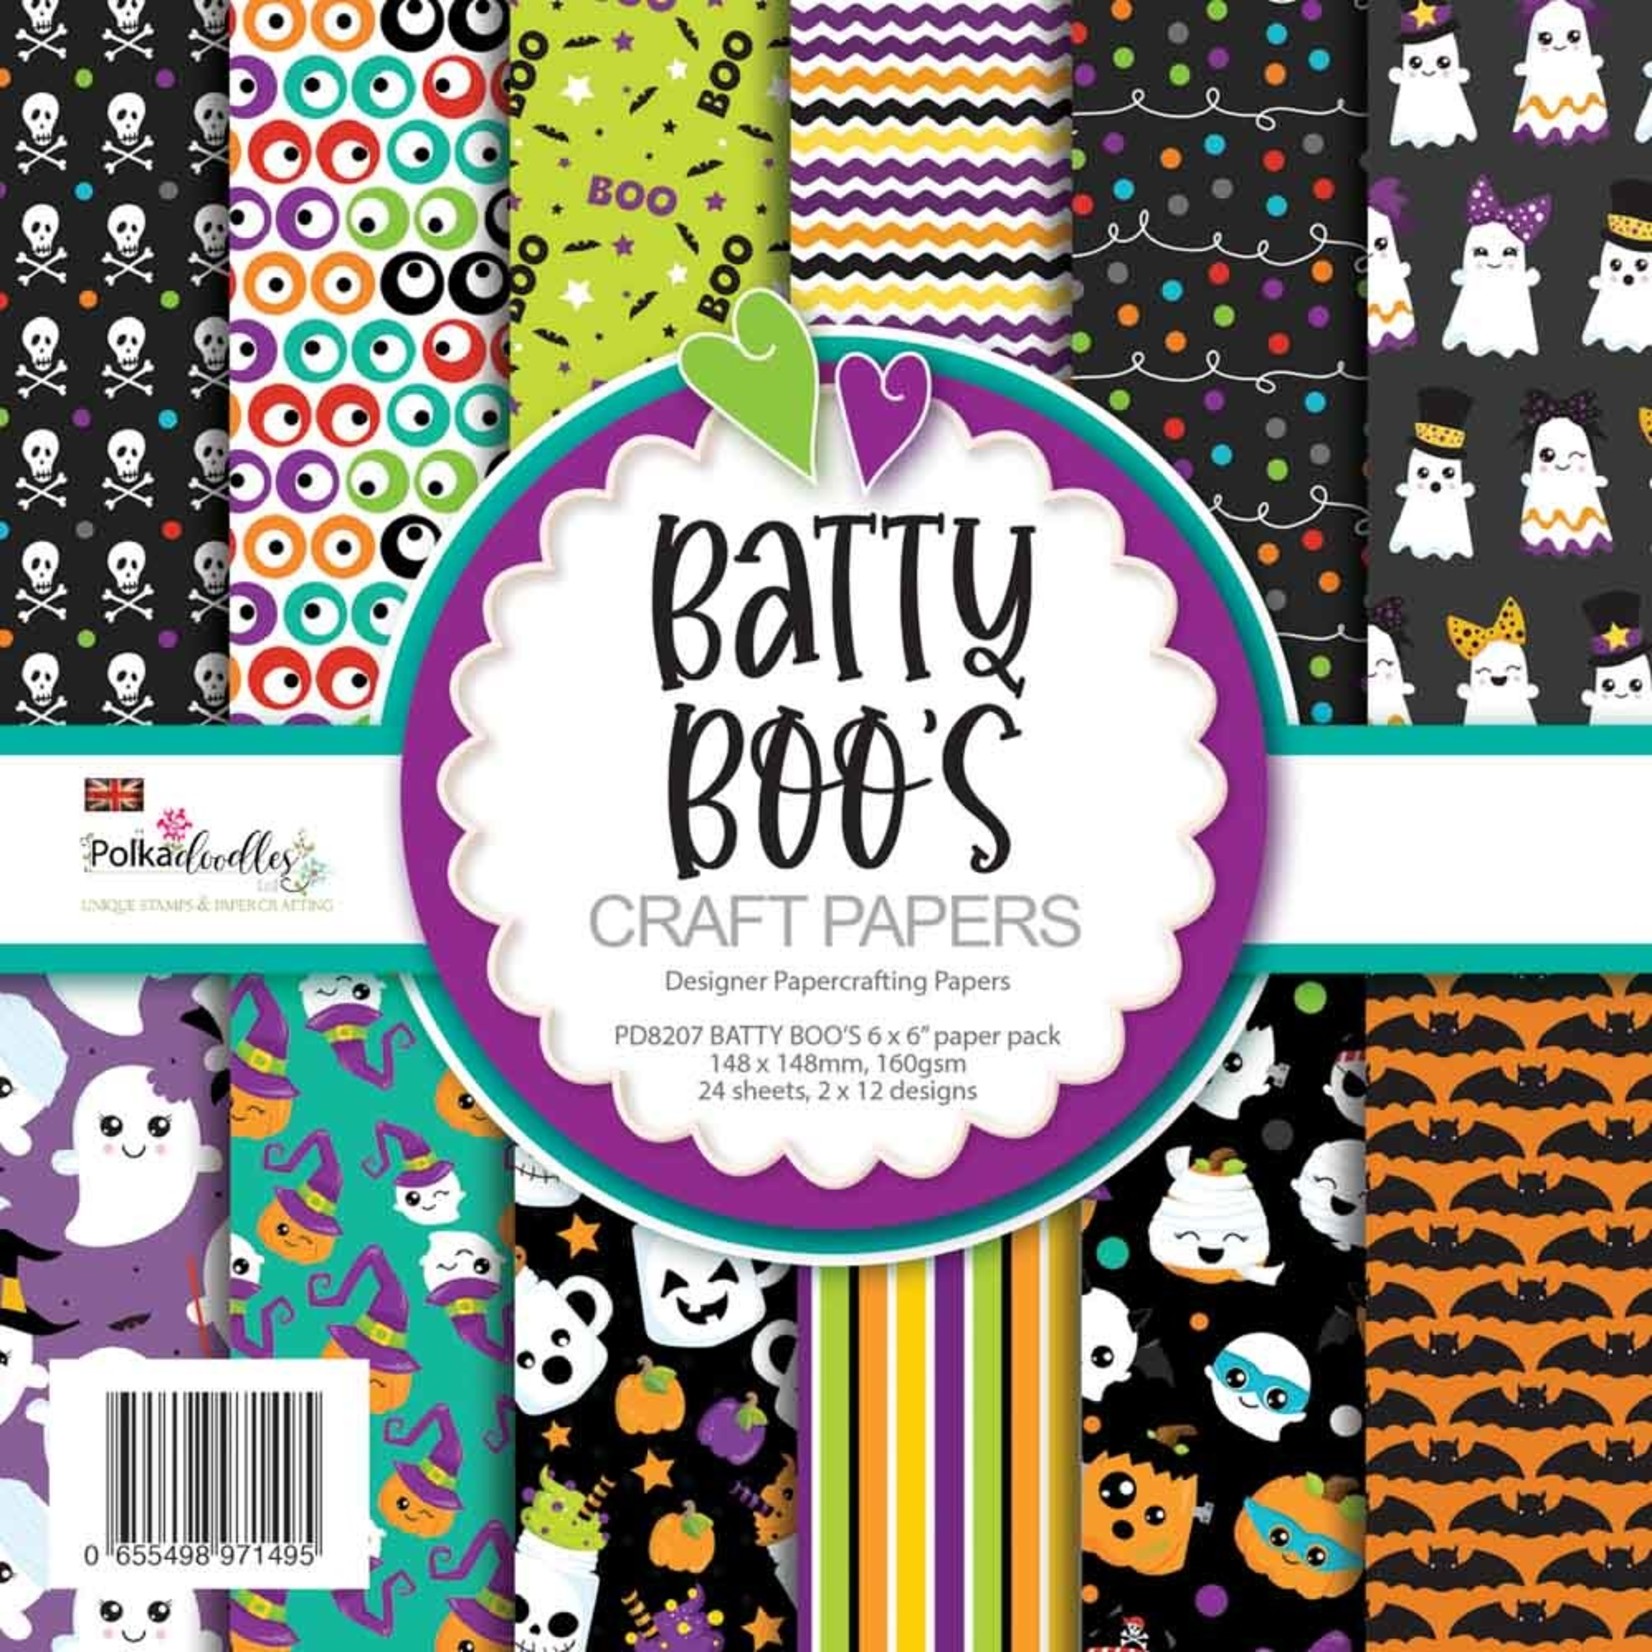 Polkadoodles Batty Boo's Craft Papers